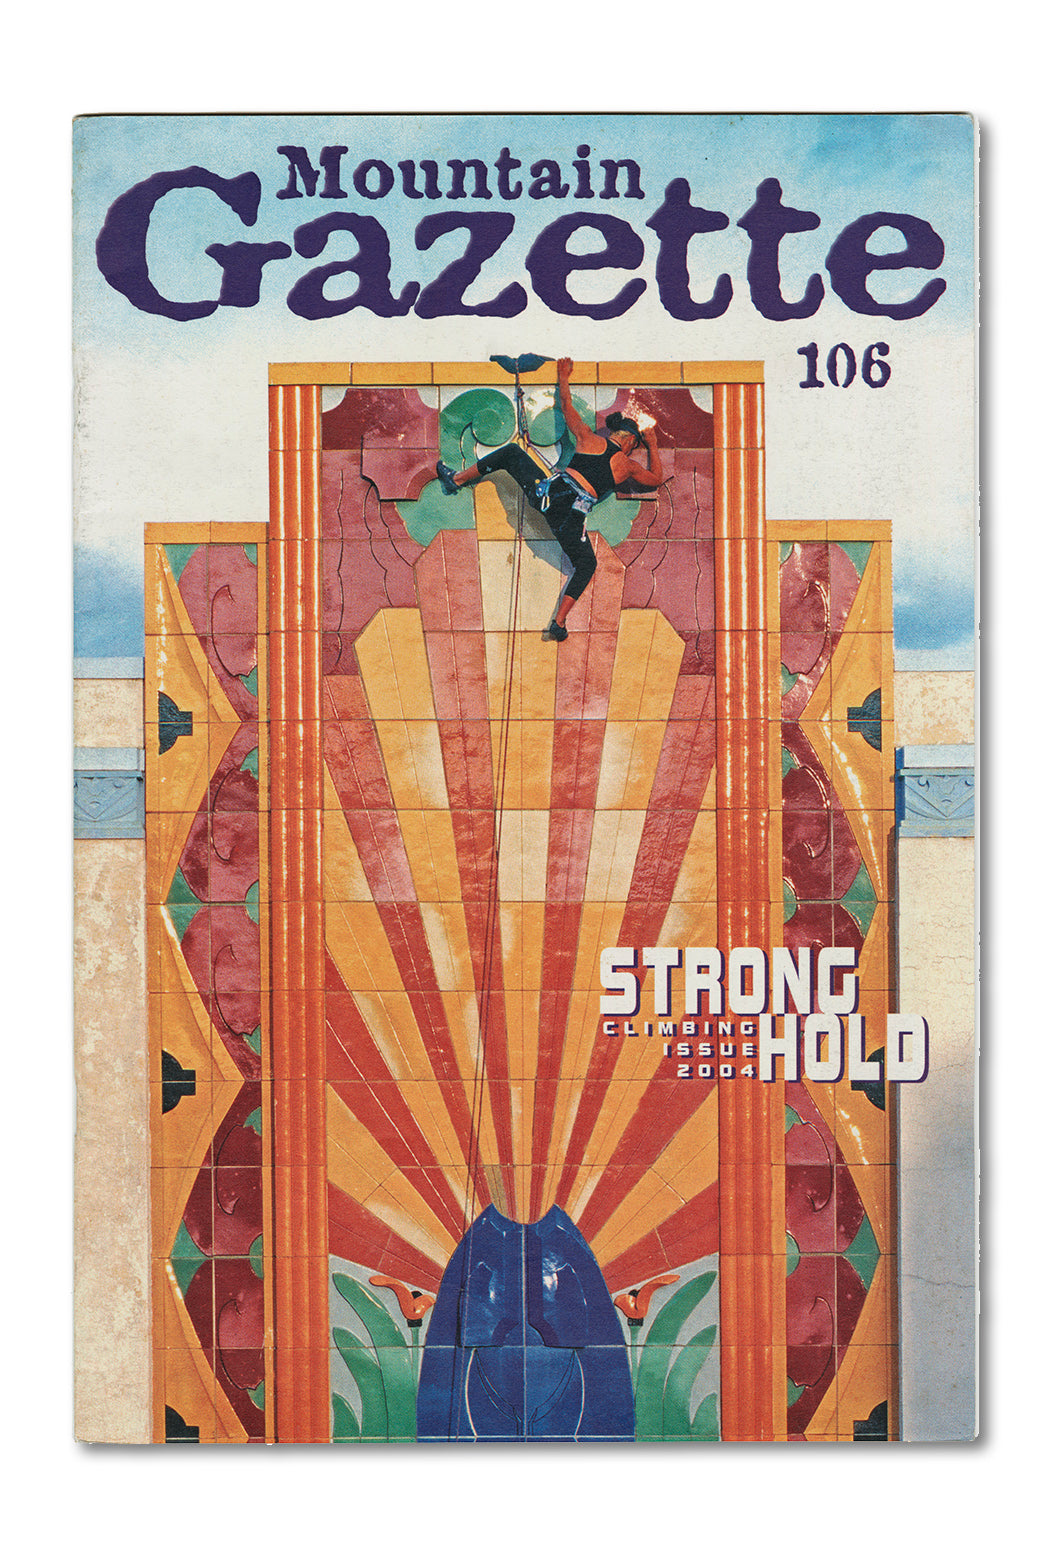 Vintage cover art from Issue 106 the climbing issue of Mountain Gazette Magazine